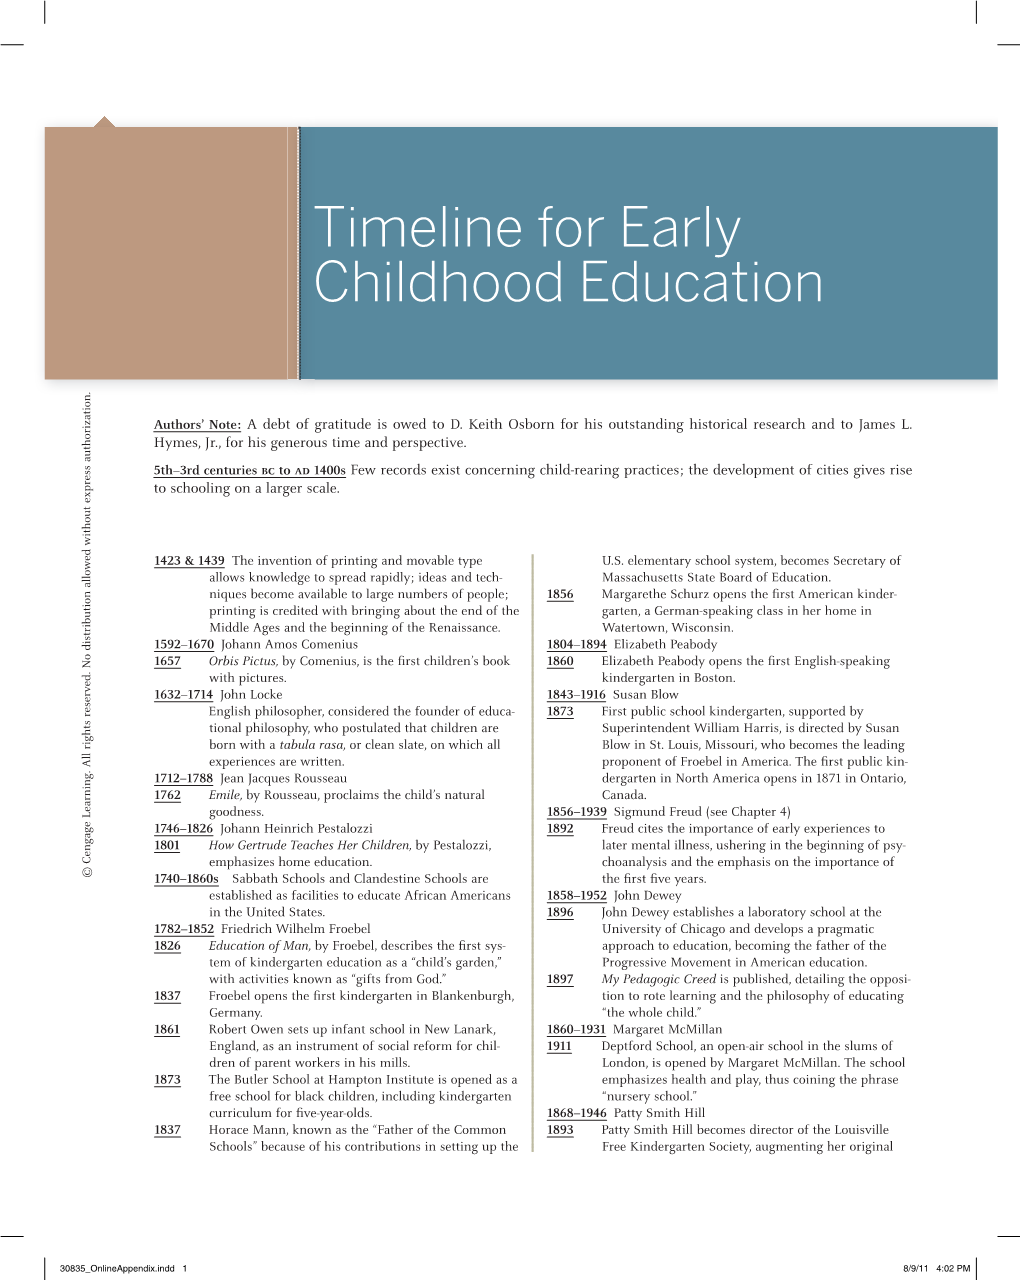 Timeline for Early Childhood Education